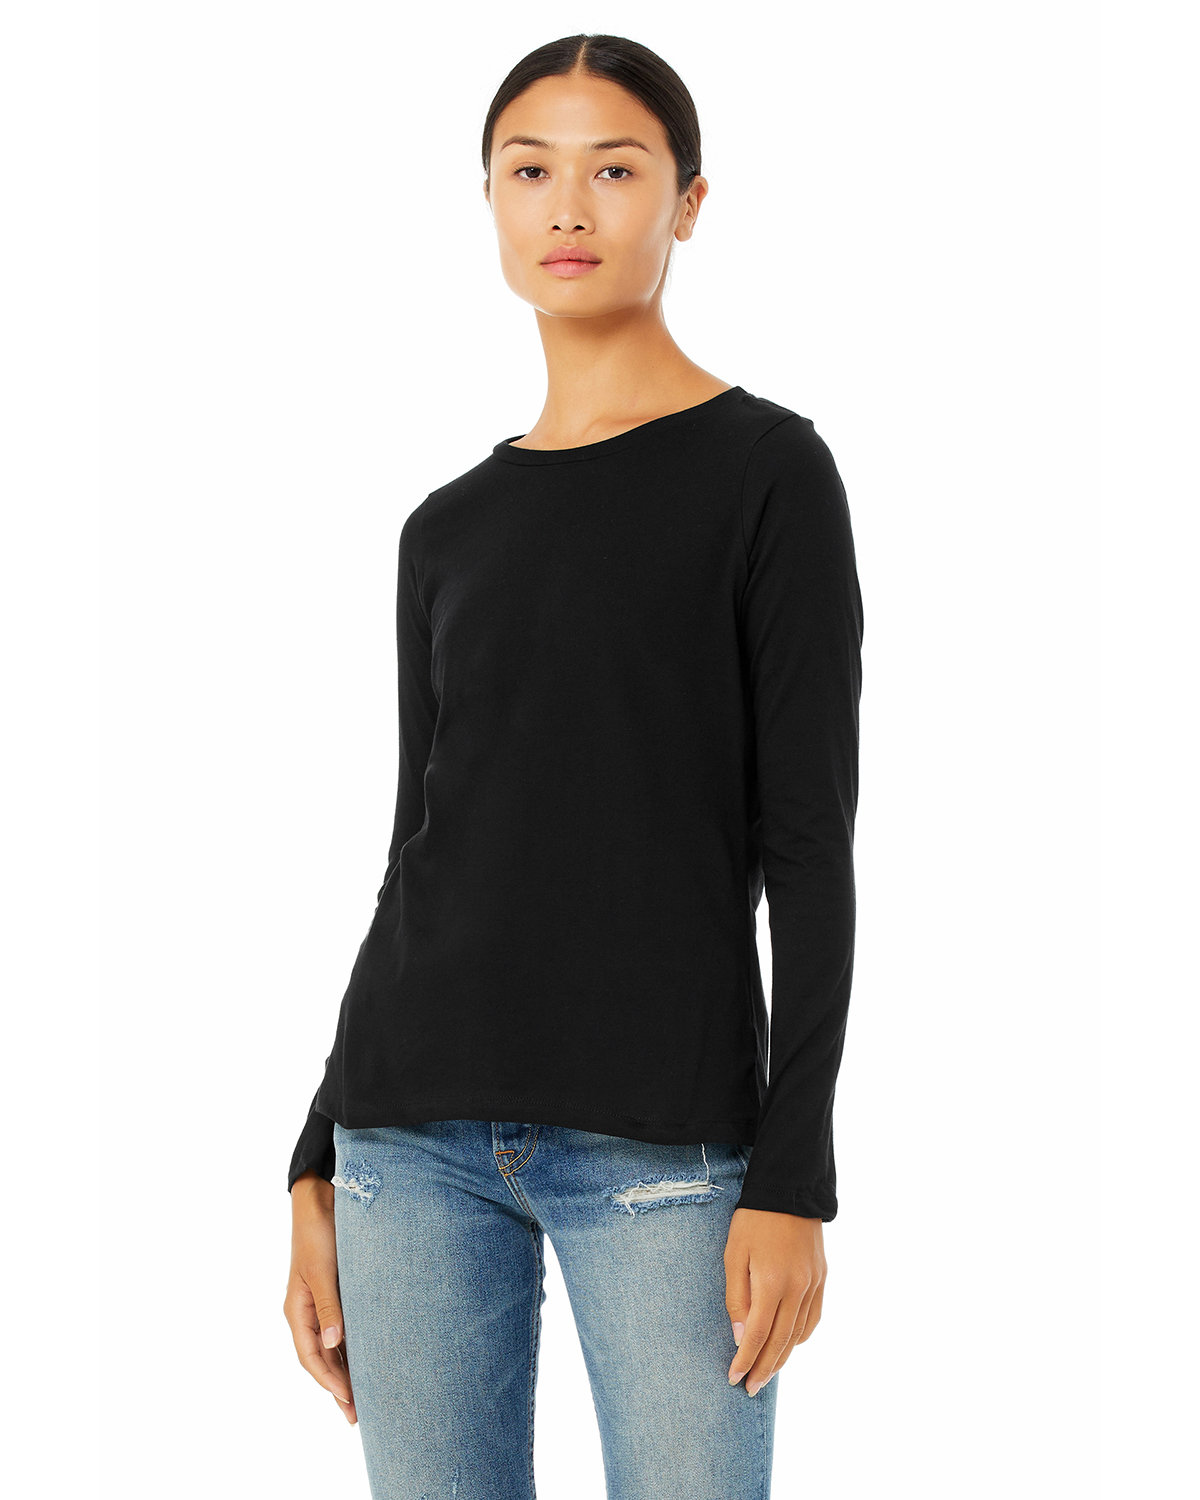 Bella + Canvas Ladies' Relaxed Jersey Long-Sleeve T-Shirt BLACK 